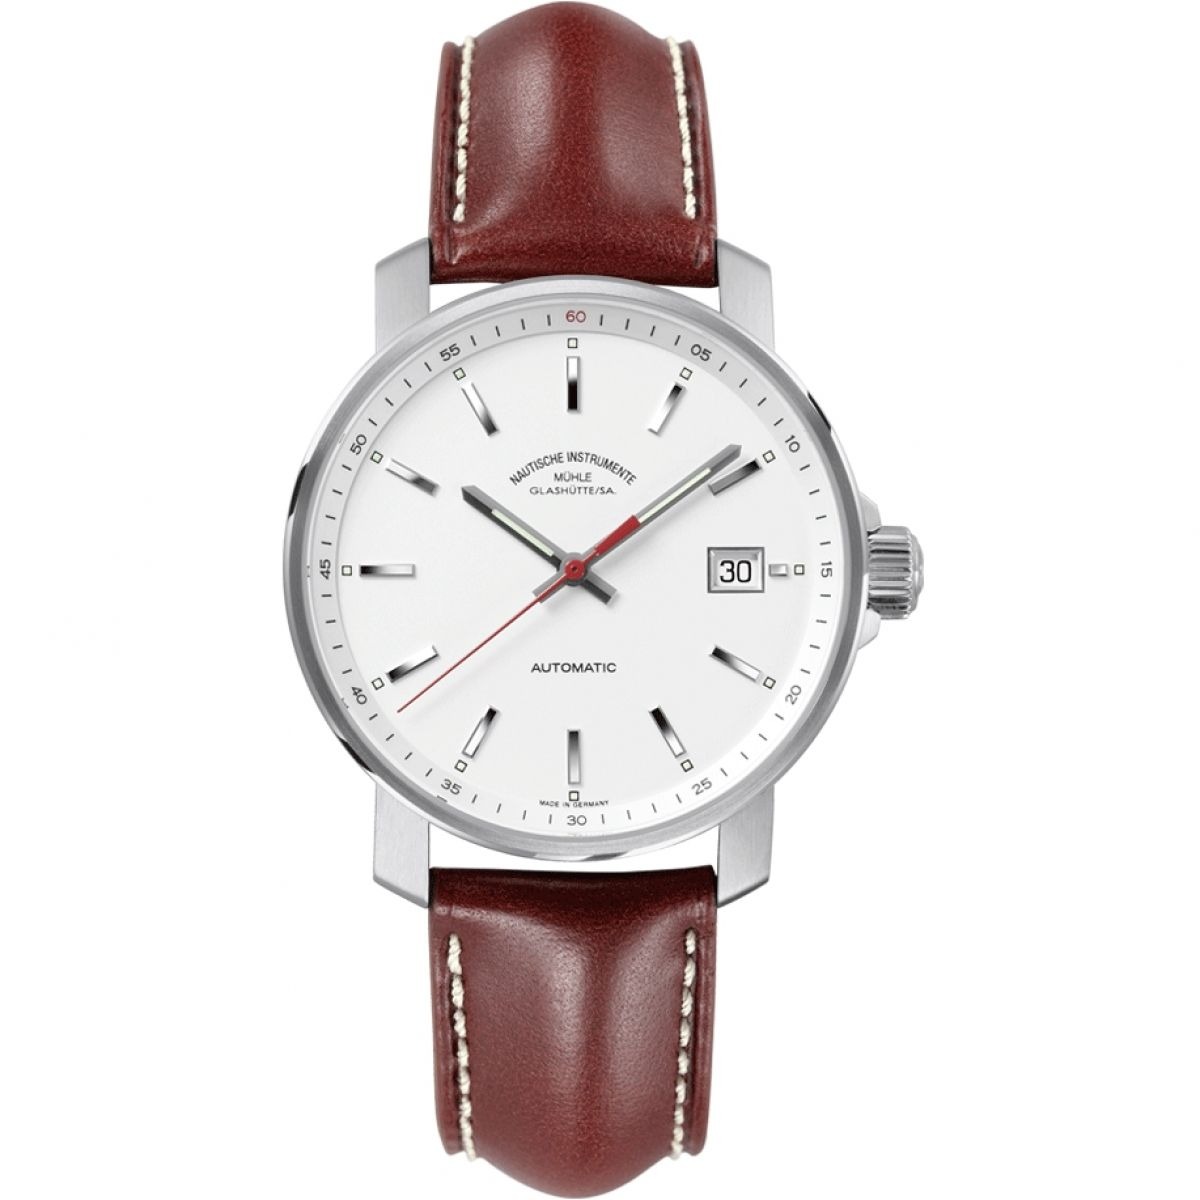 Watch Shop - White Watch for Man from Muhle Glashutte GOOFASH